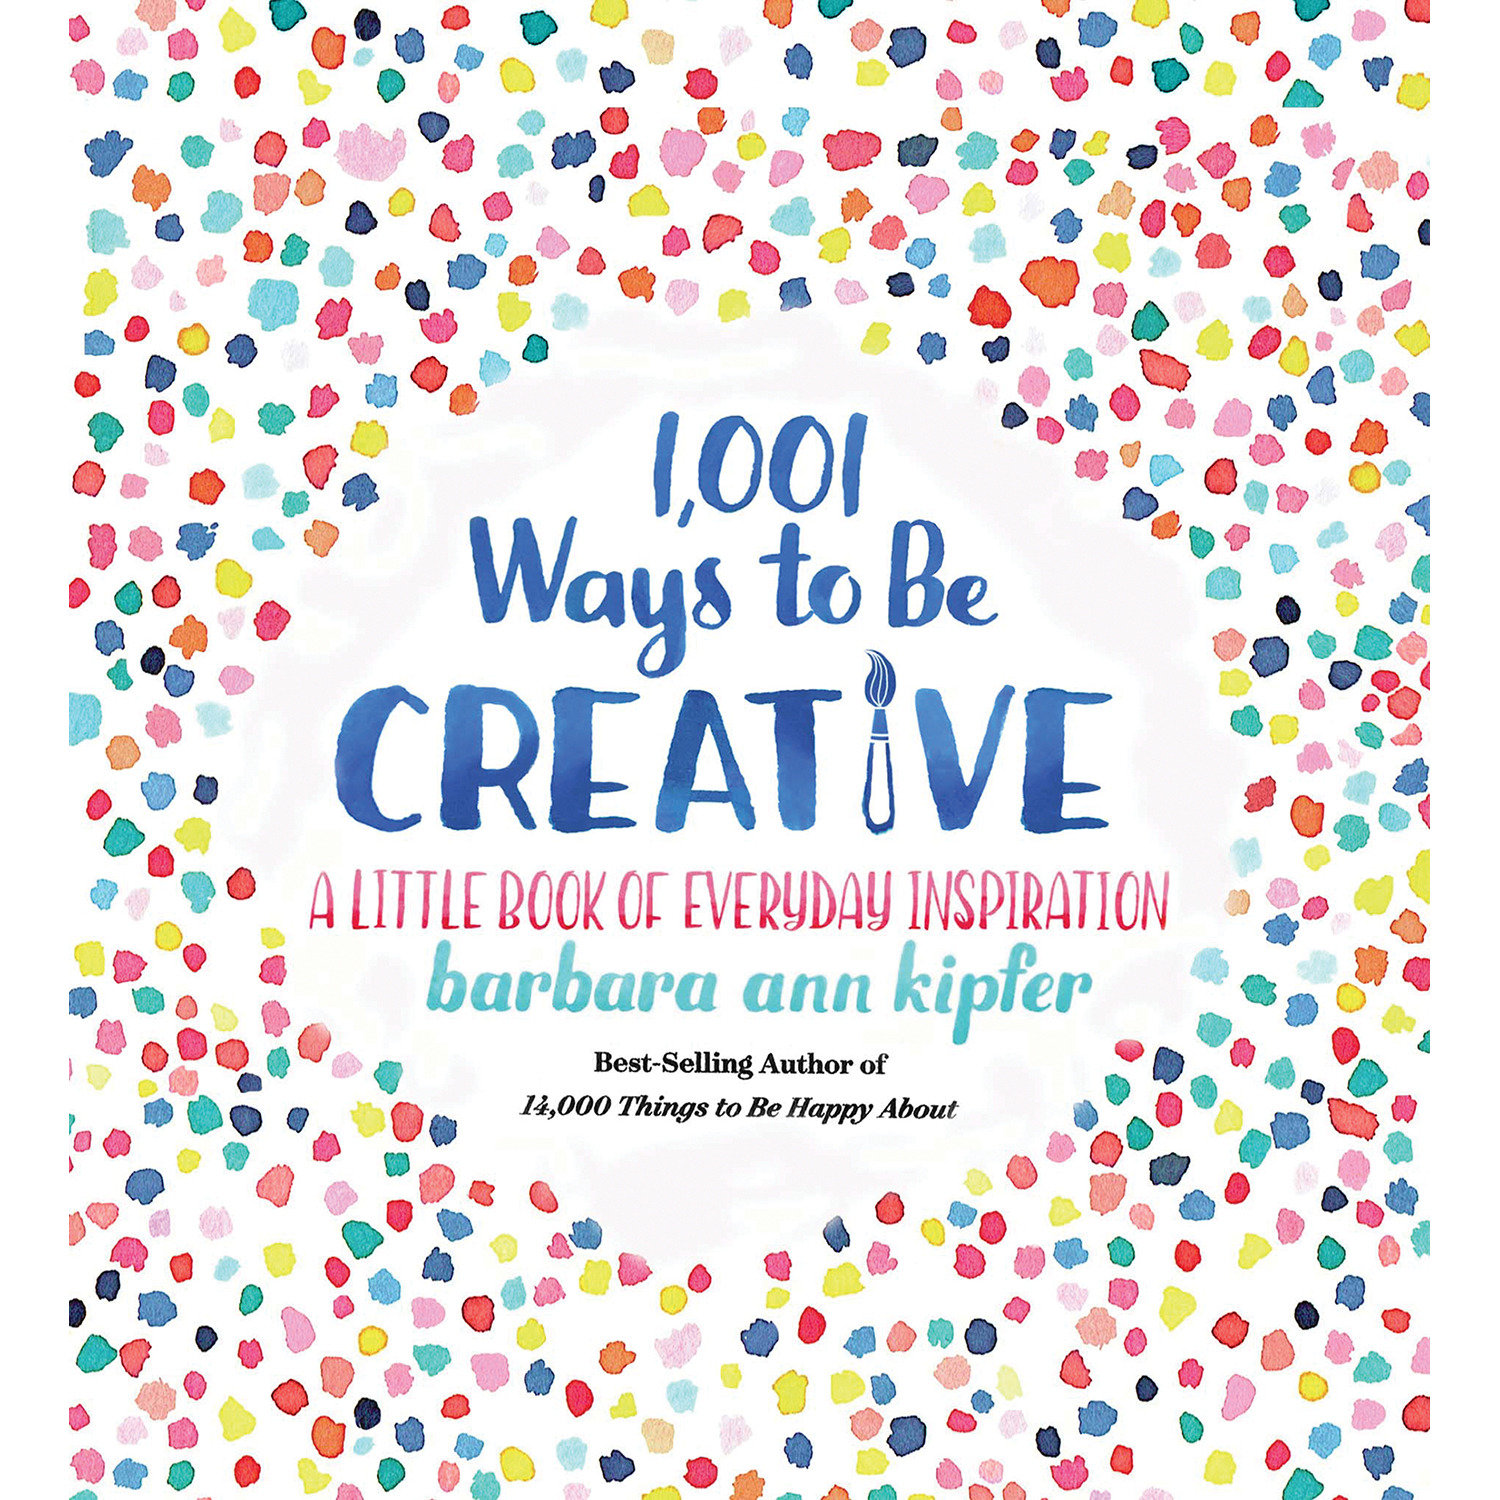 1,001 Ways To Be Creative (Hardcover Book)